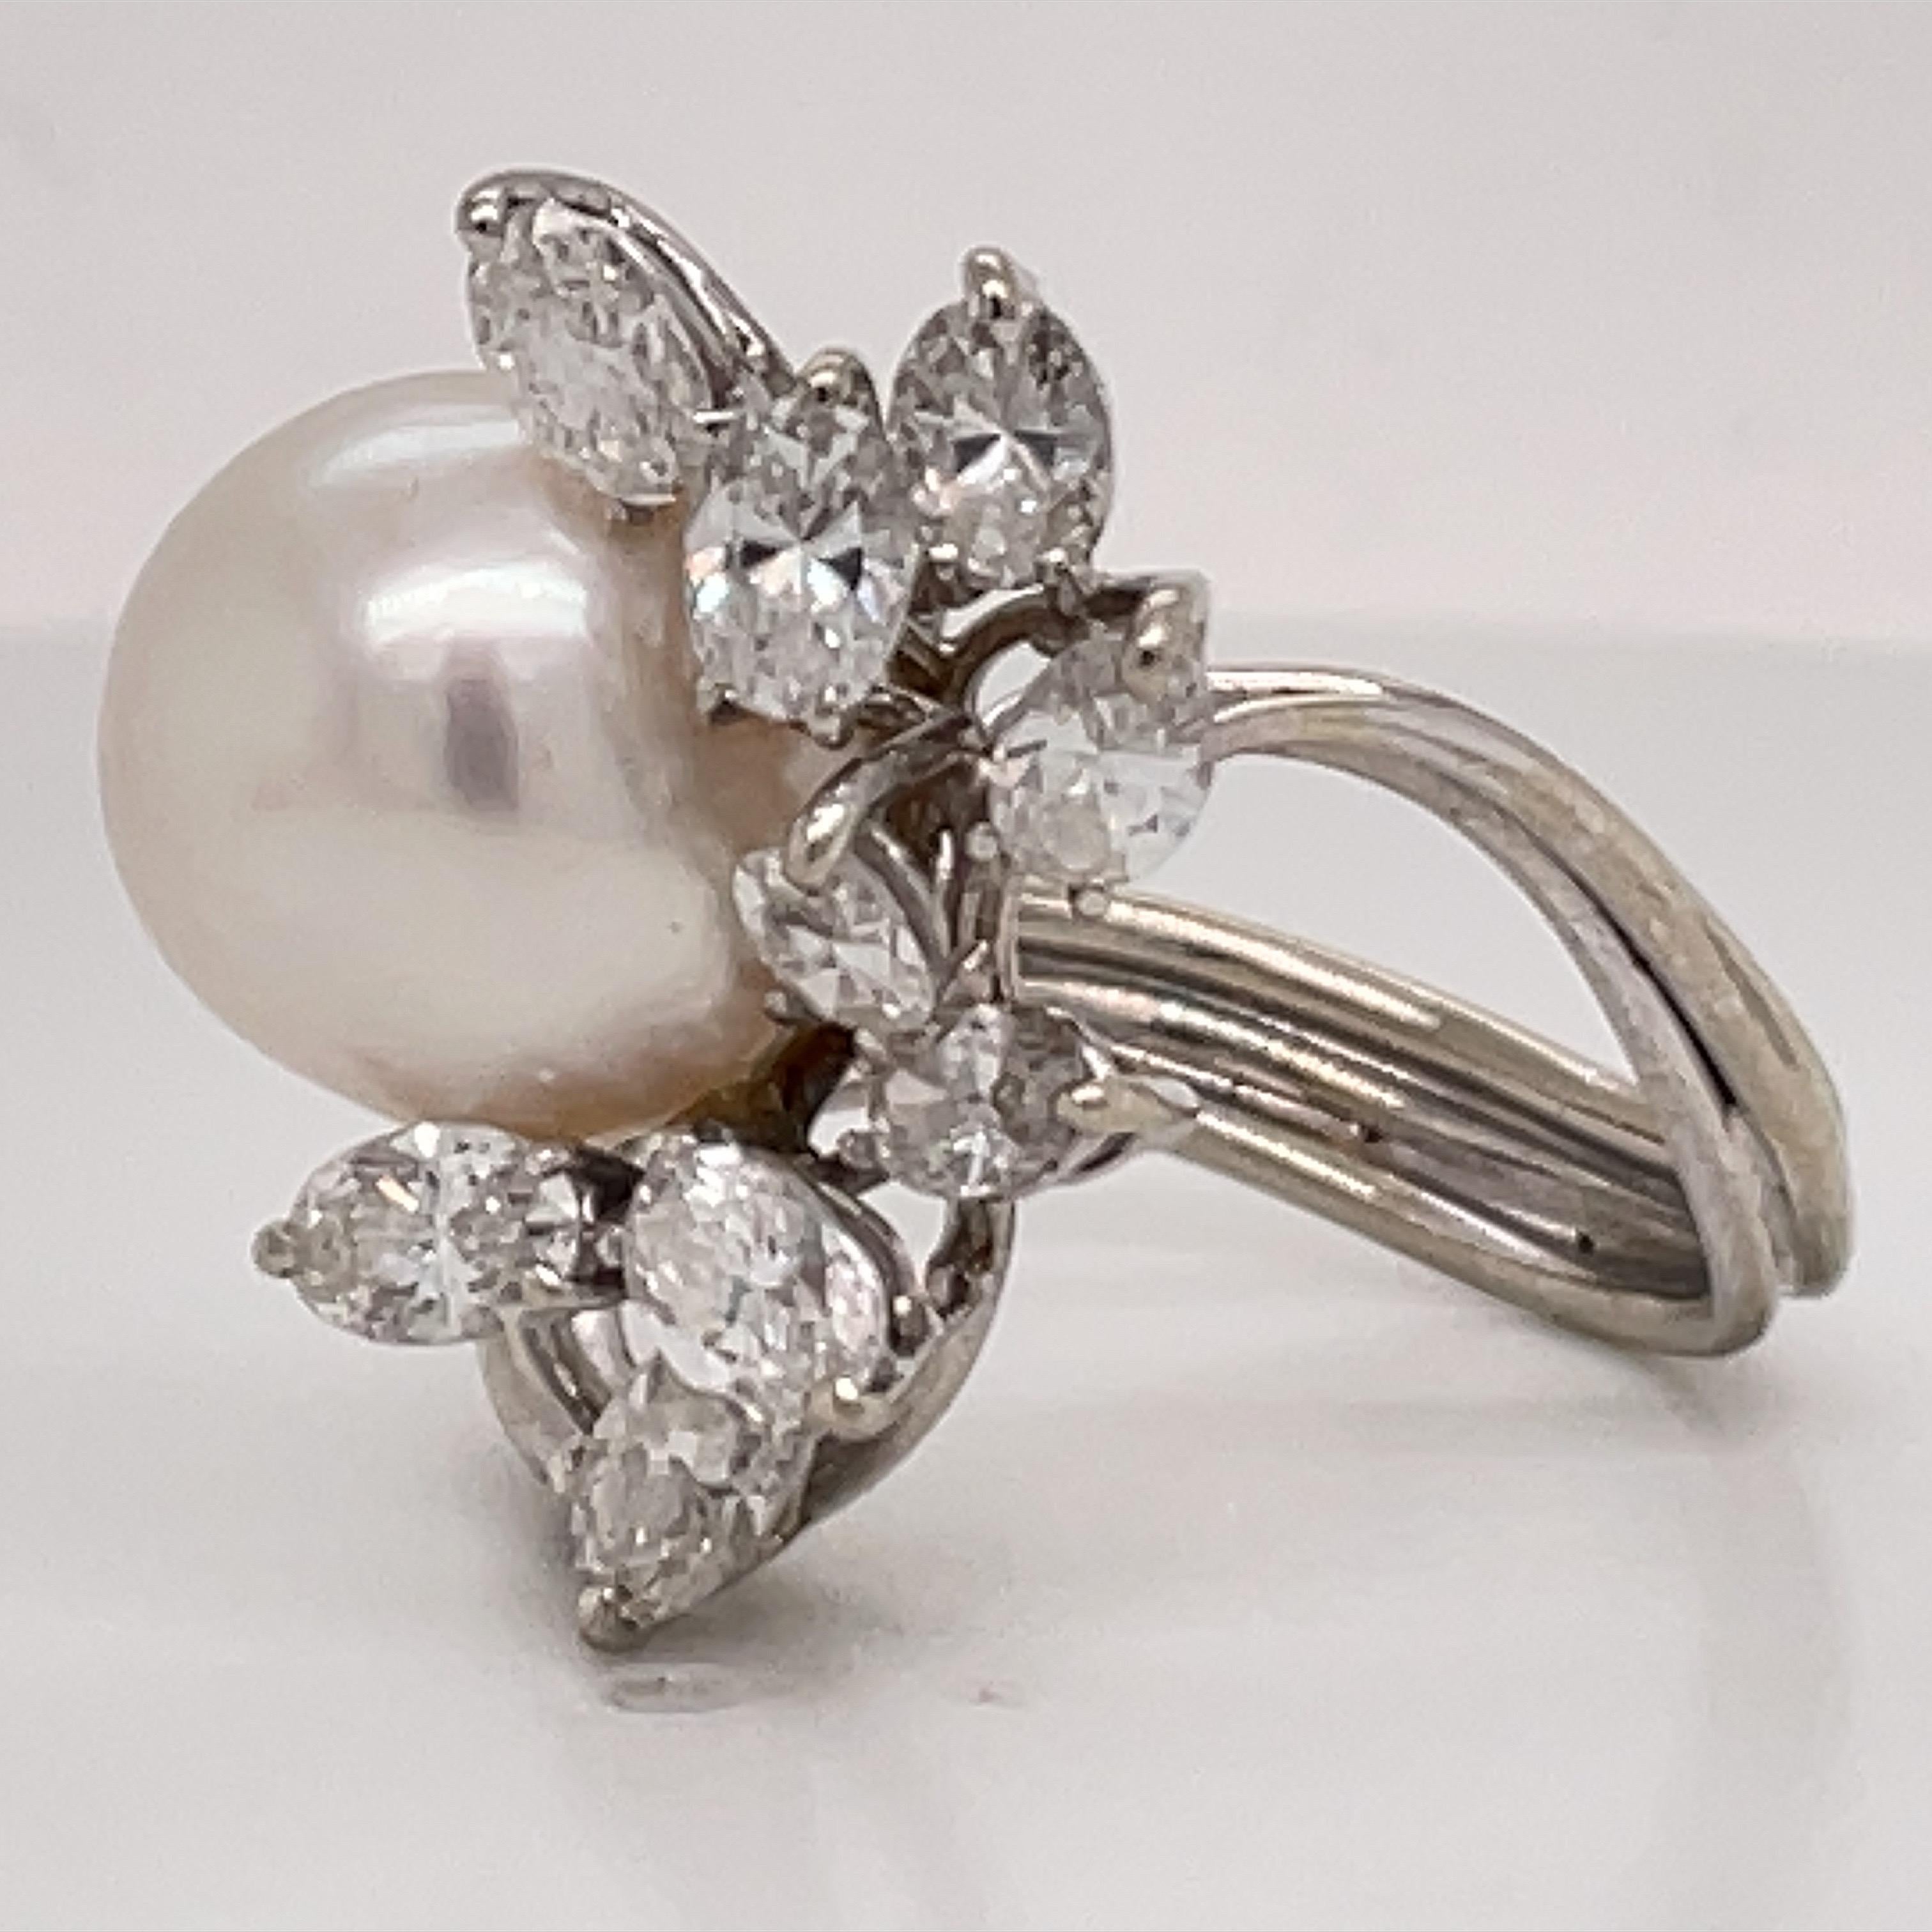 Women's Australian South Sea Pearl Diamond Cluster Cocktail Ring 2 Carats 14K White Gold